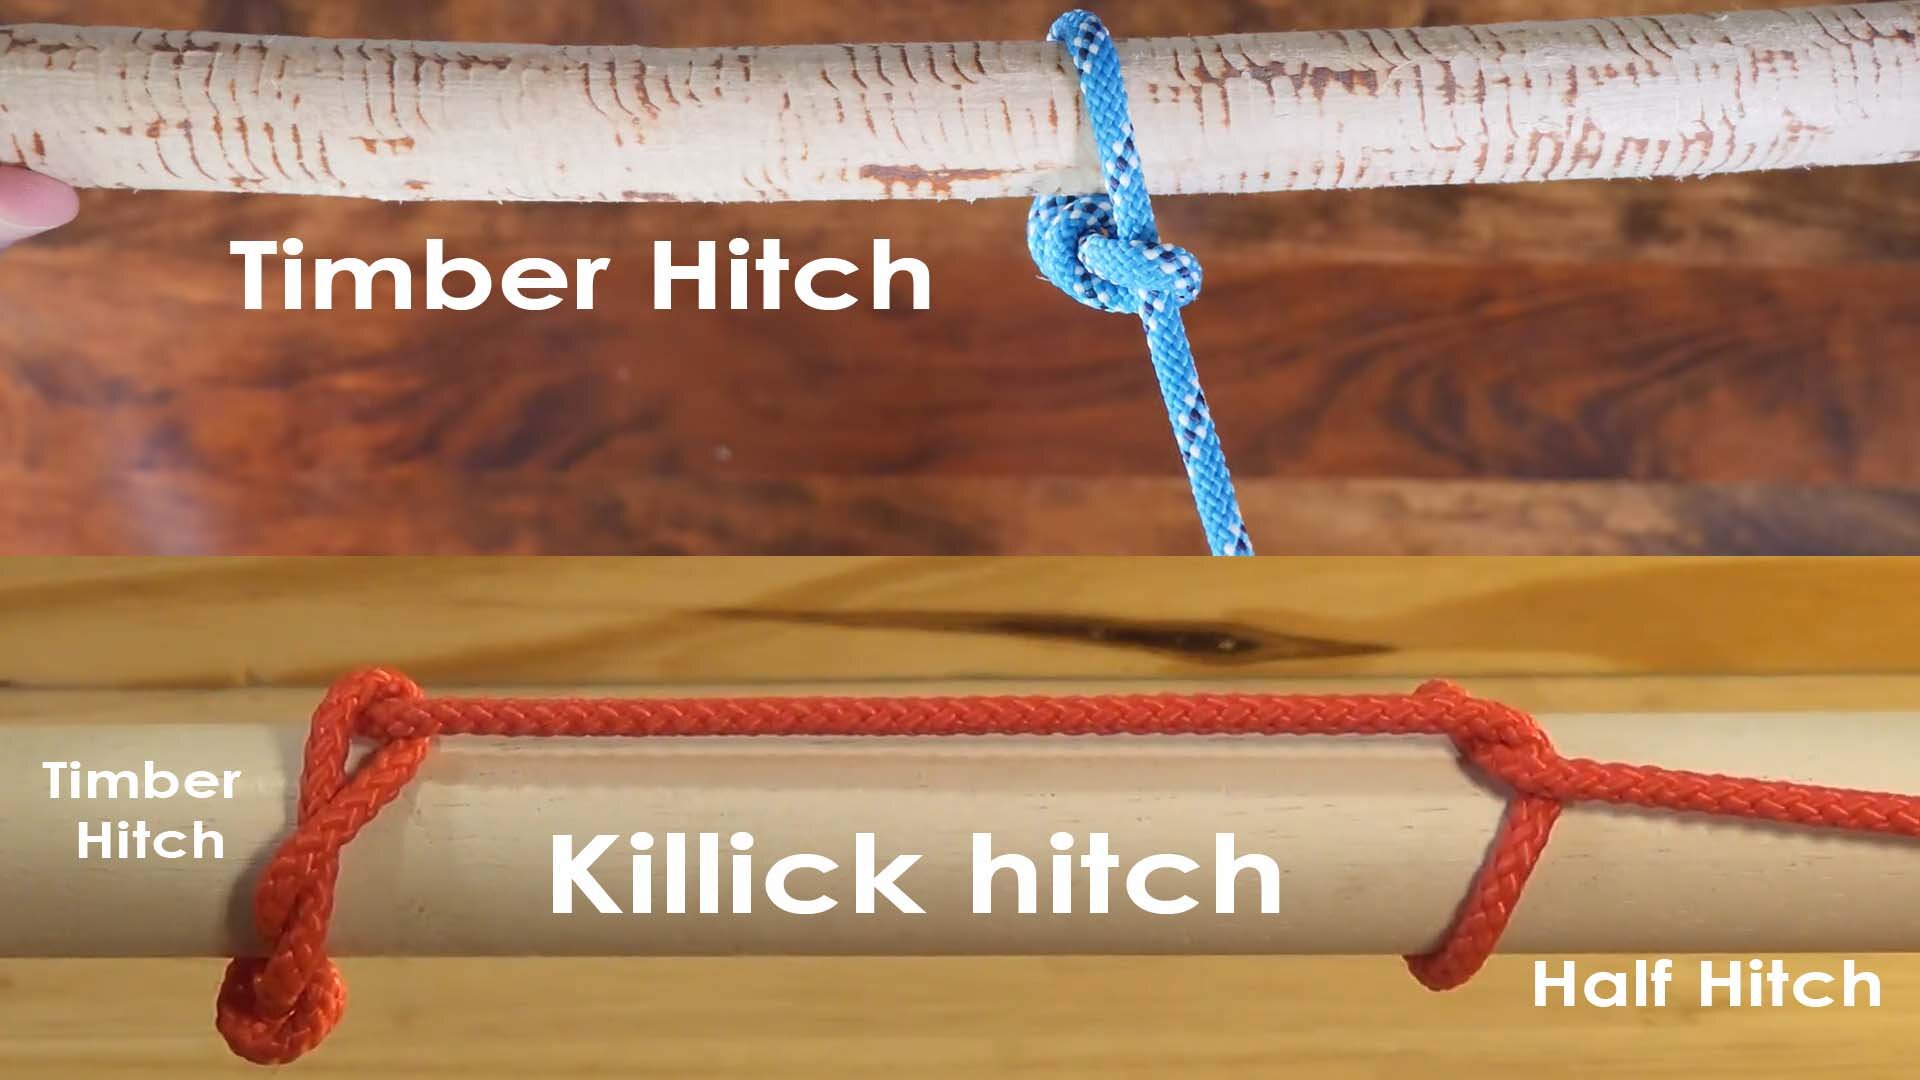 Timber Hitch and a Killick Hitch